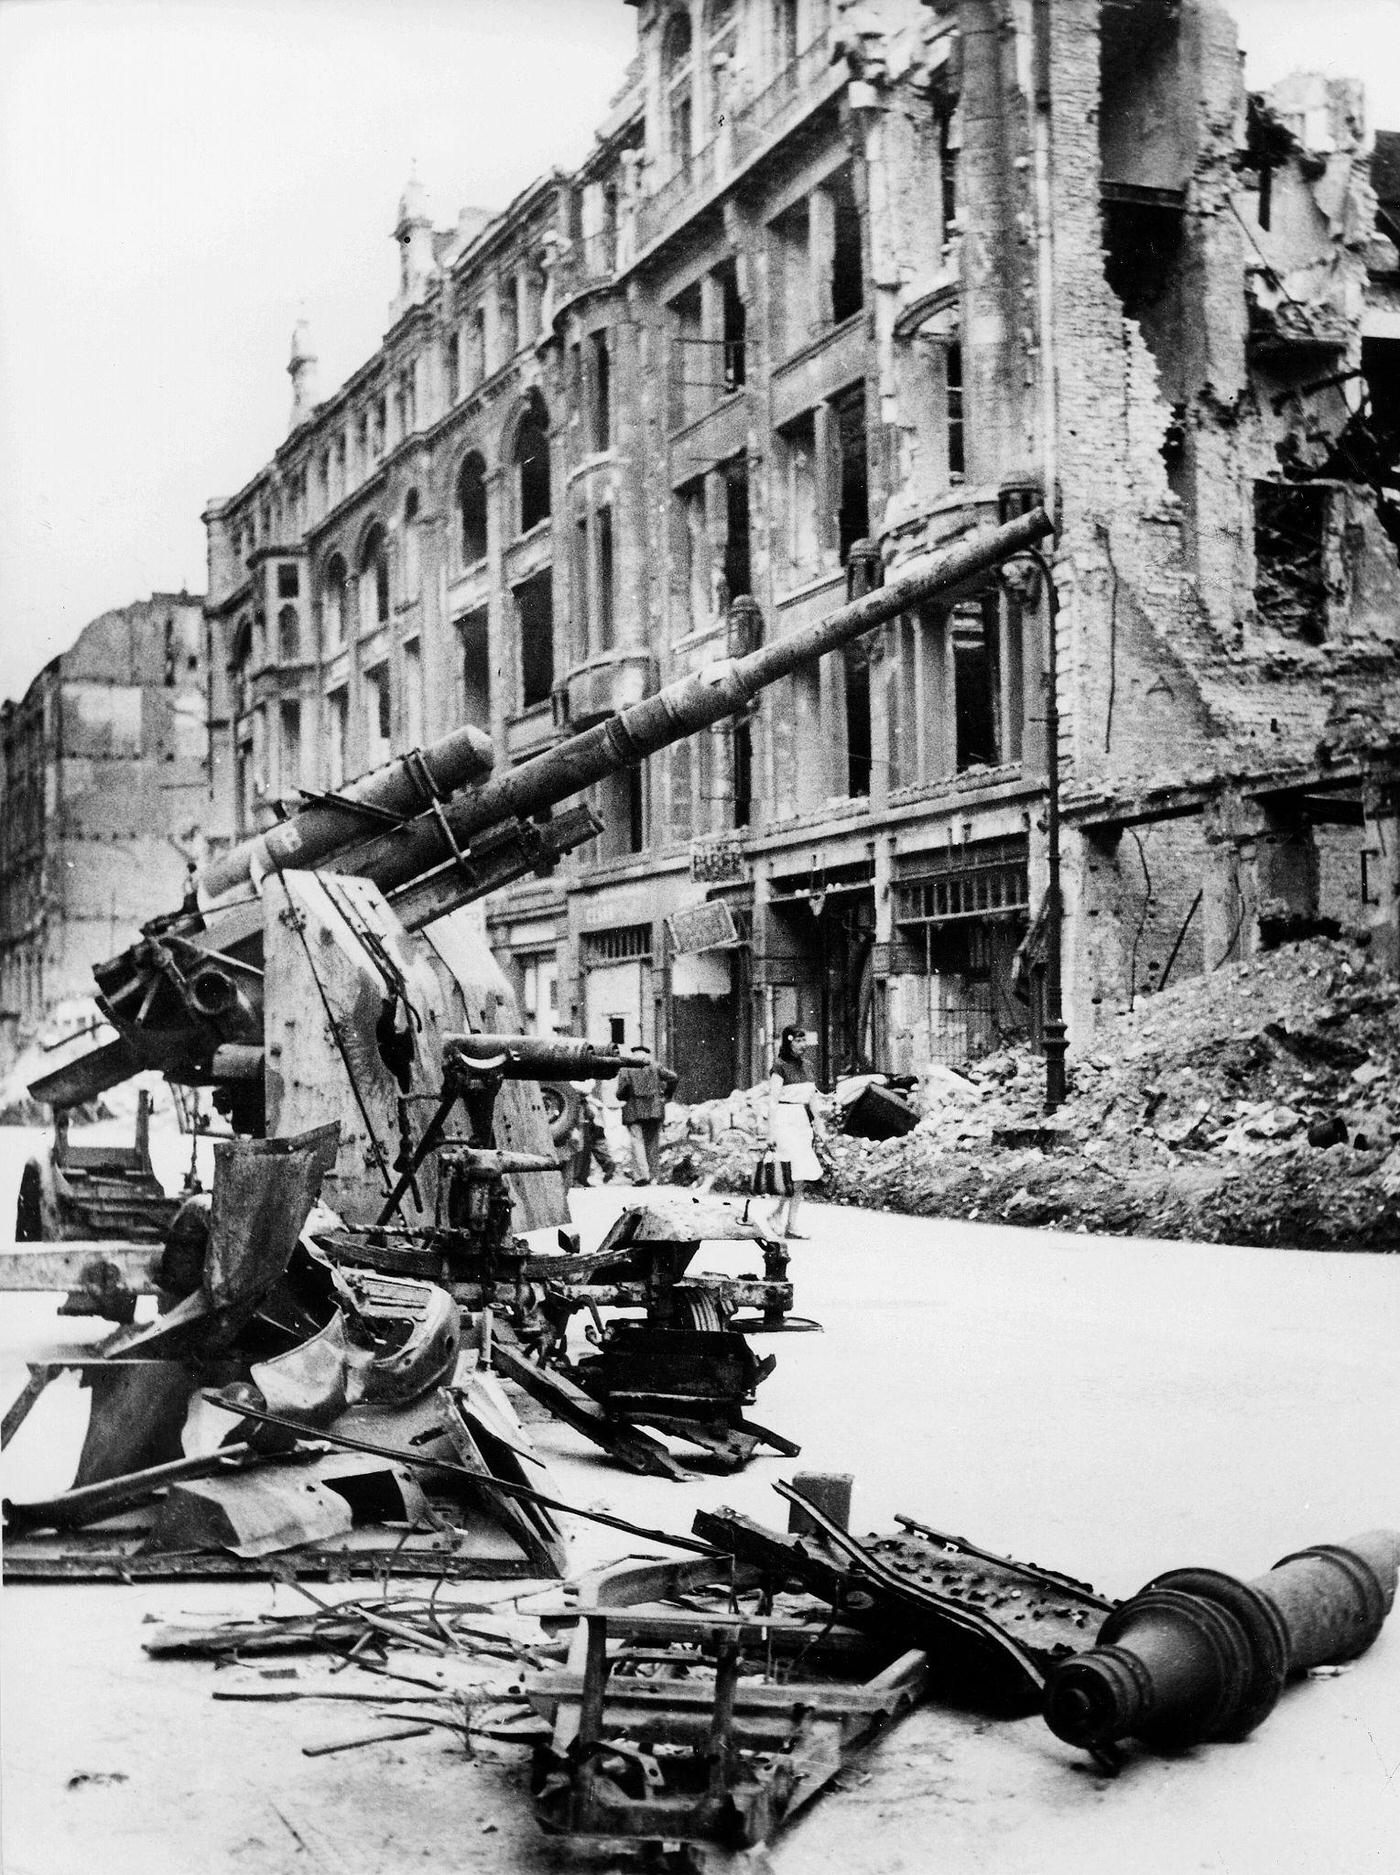 Destroyed street in Berlin with a wrecked anti-aircraft gun, 1945.